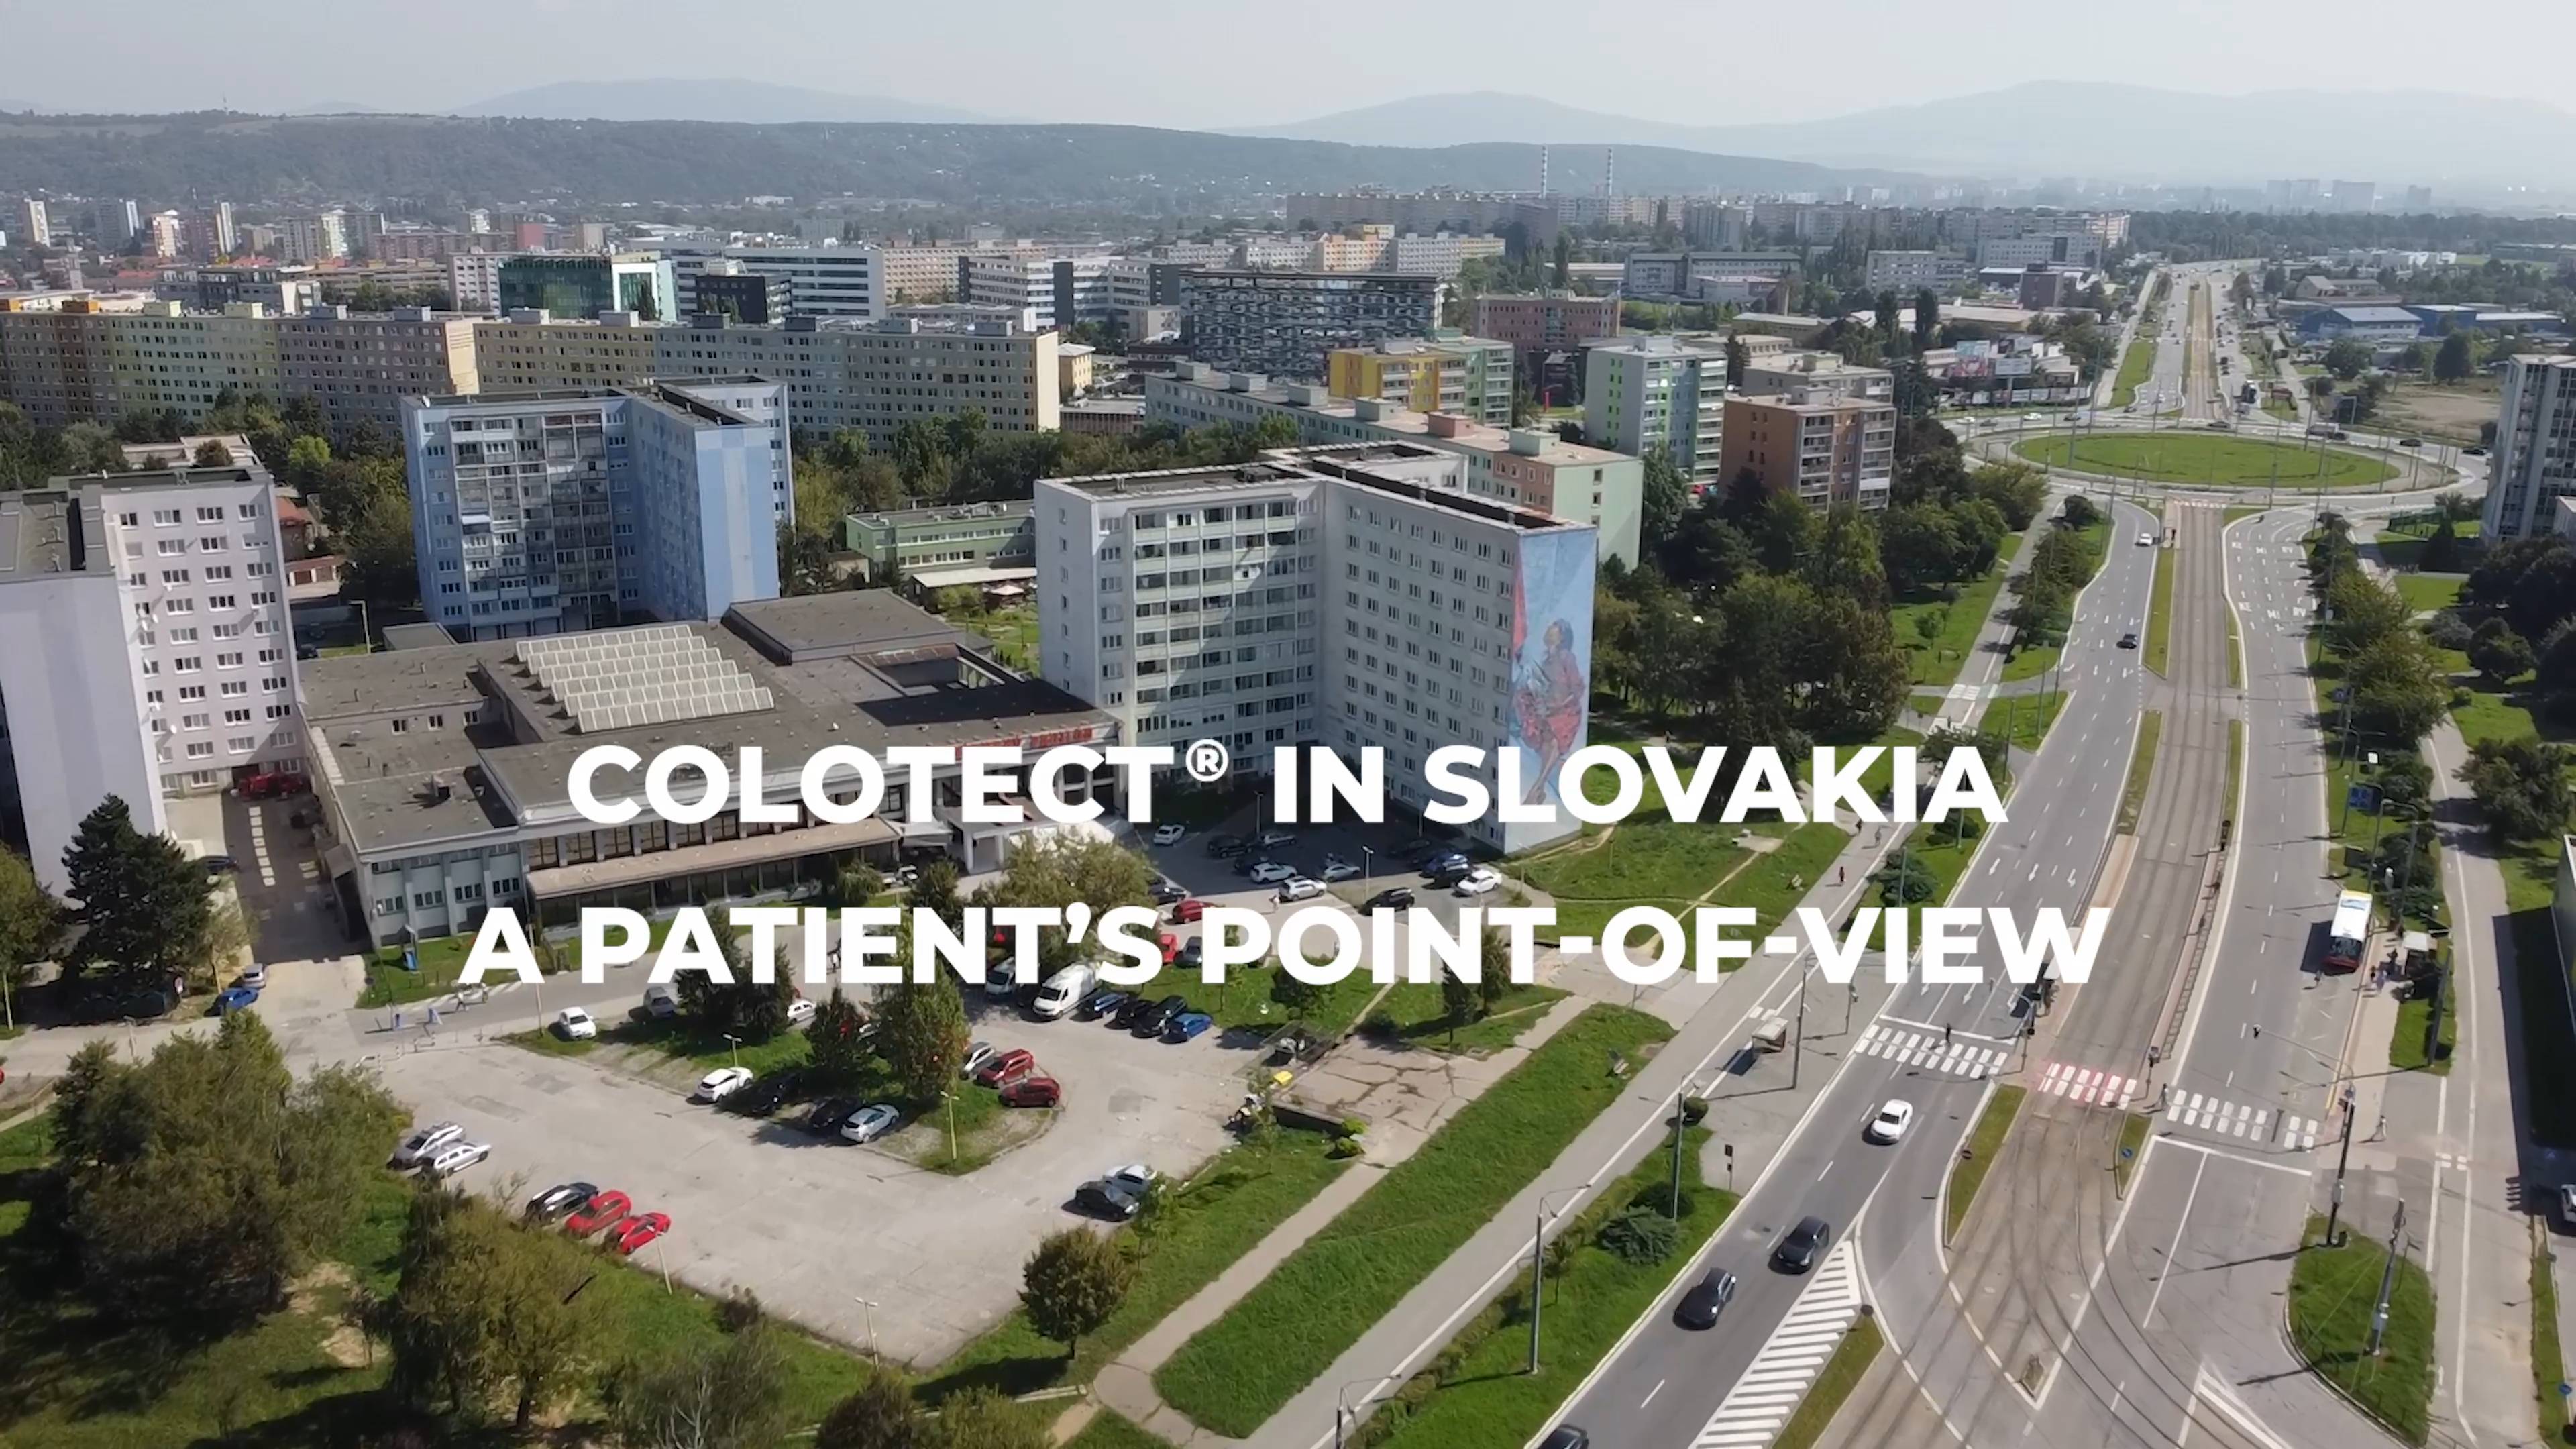 colotect® in slovakia - a patient's point of view